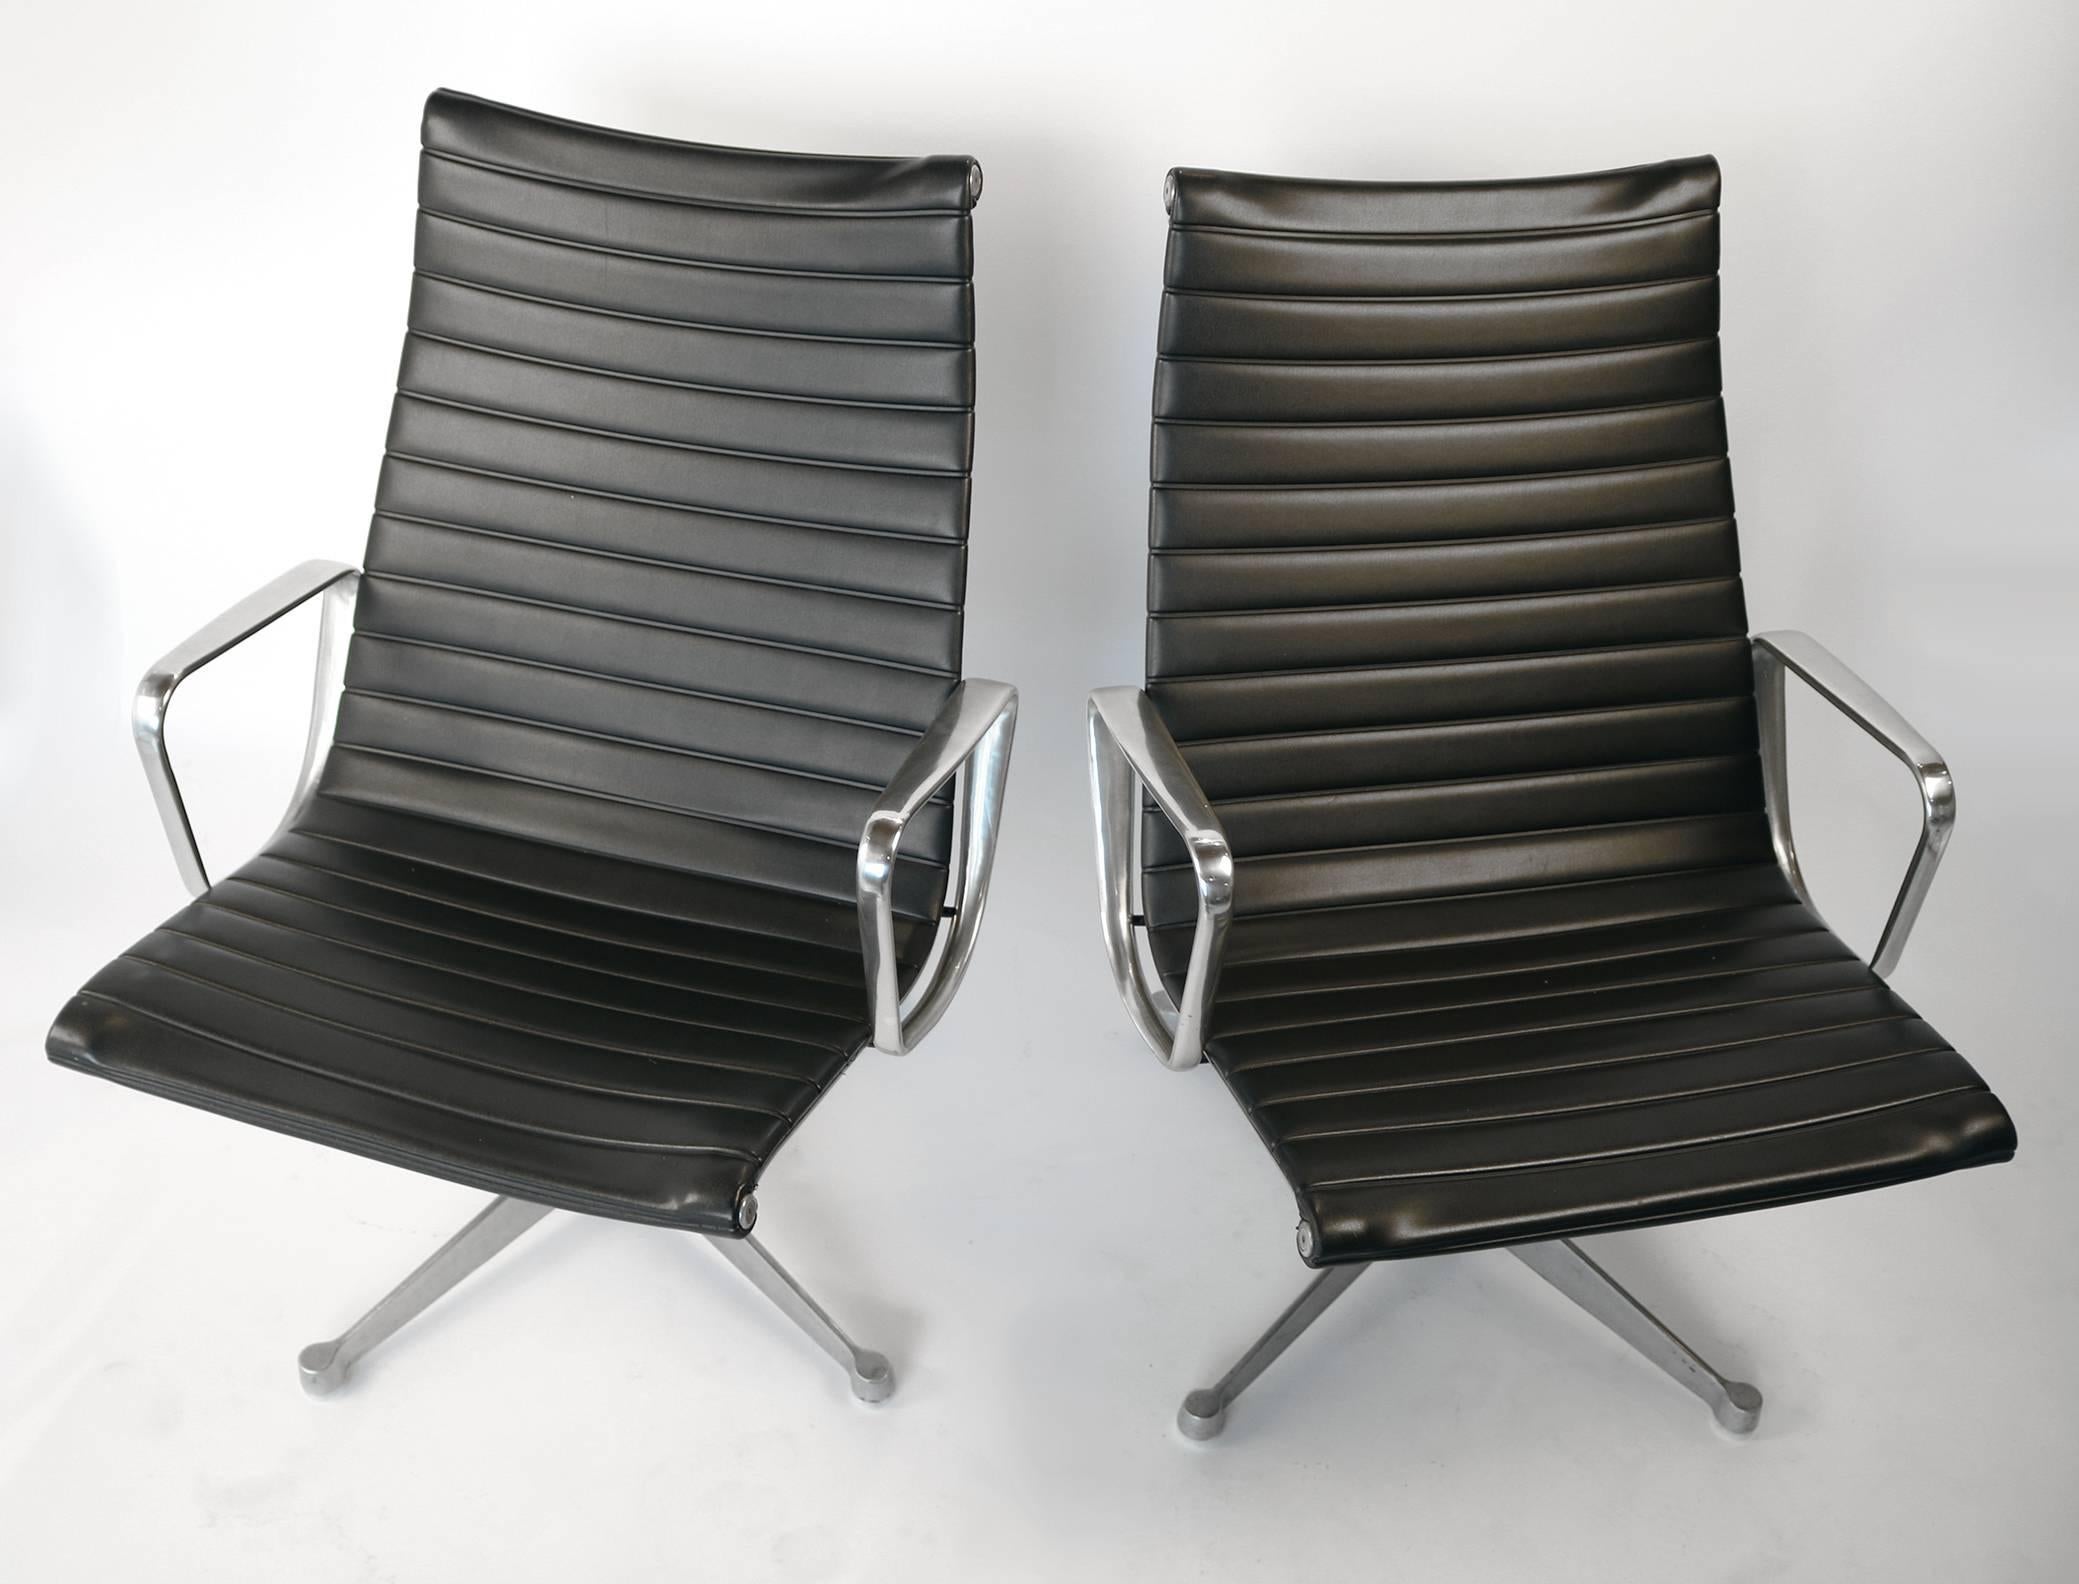 Early original Charles Eames for Herman Miller Aluminum group lounge chairs. Very good original condition with the desirable polished aluminum arms.